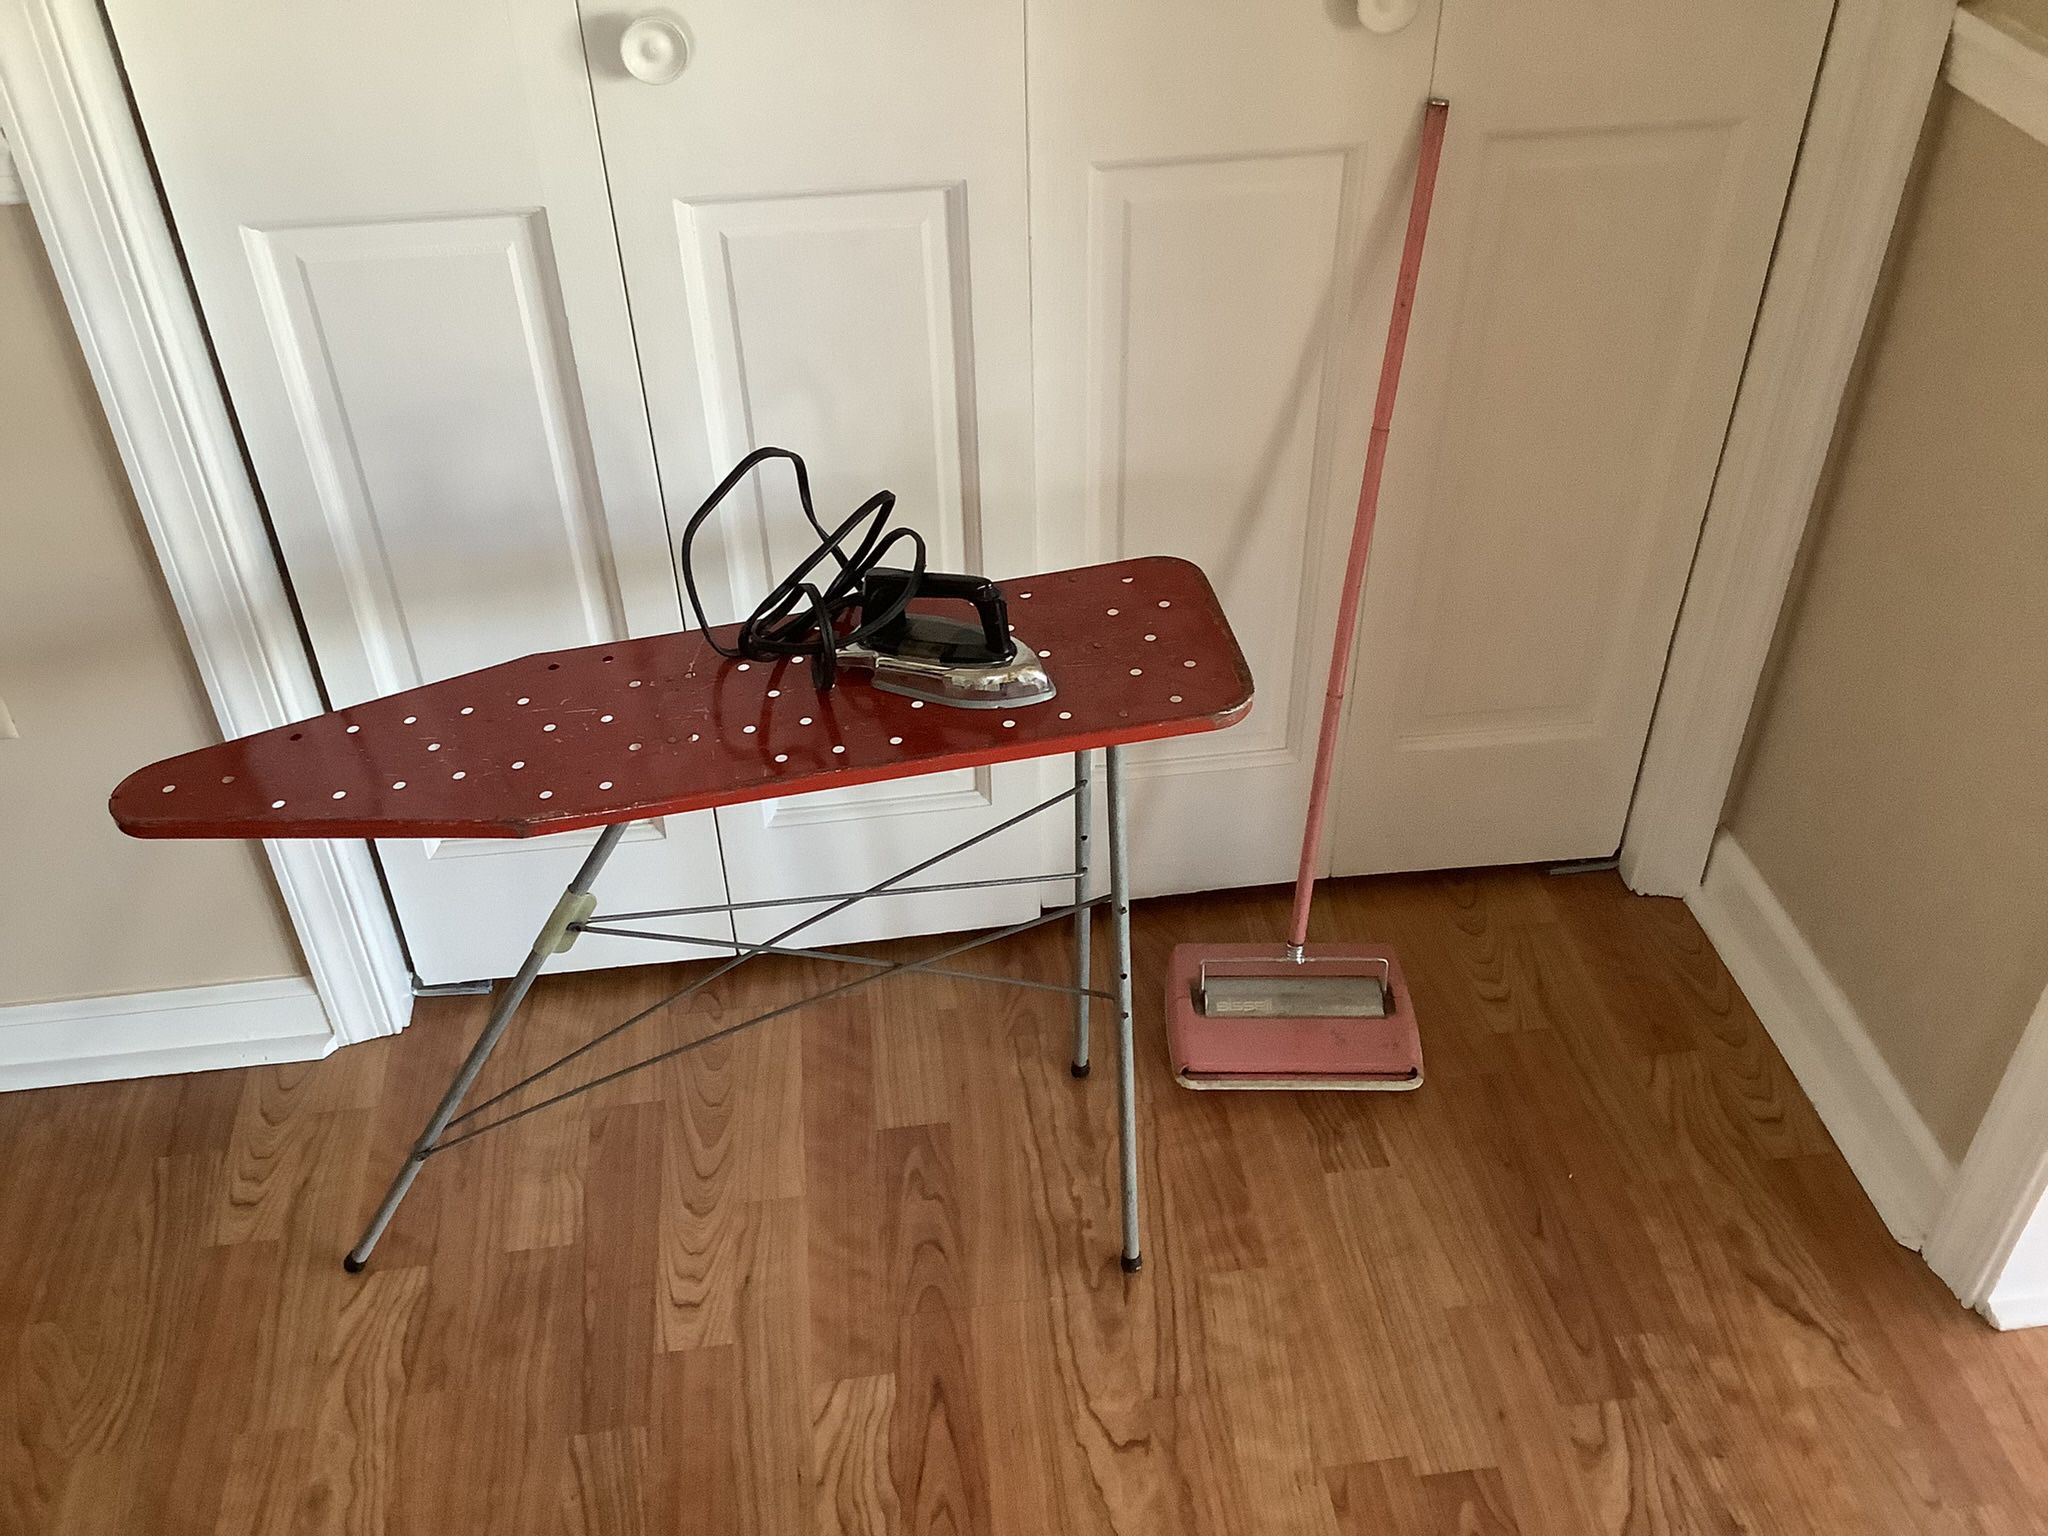 Child’s Antique Ironing Board And Iron